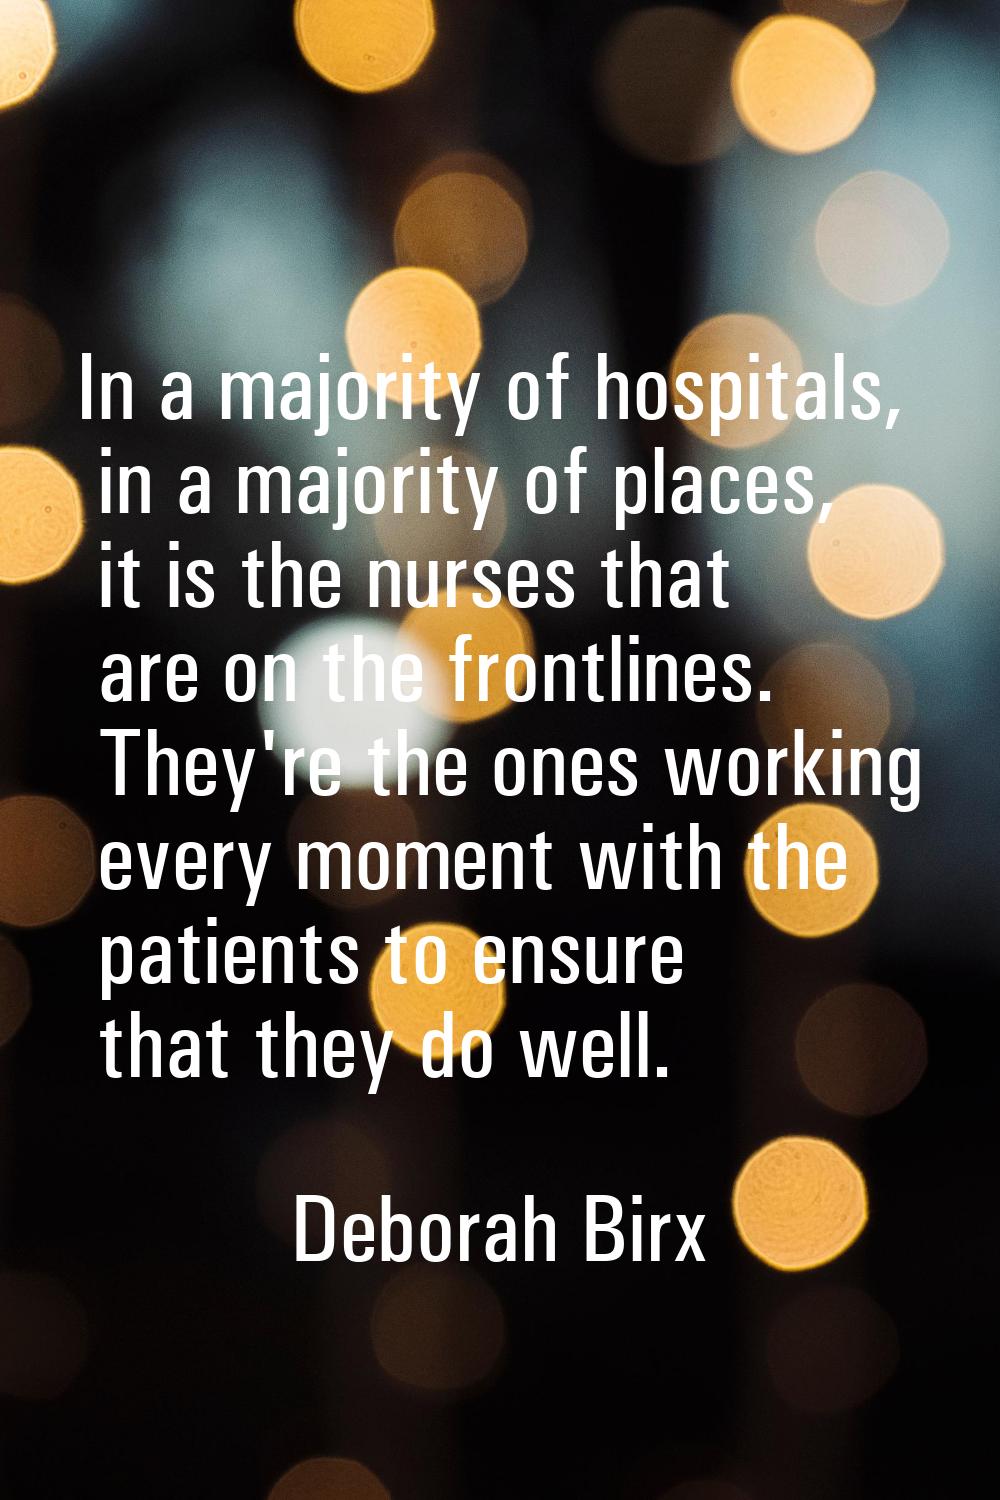 In a majority of hospitals, in a majority of places, it is the nurses that are on the frontlines. T